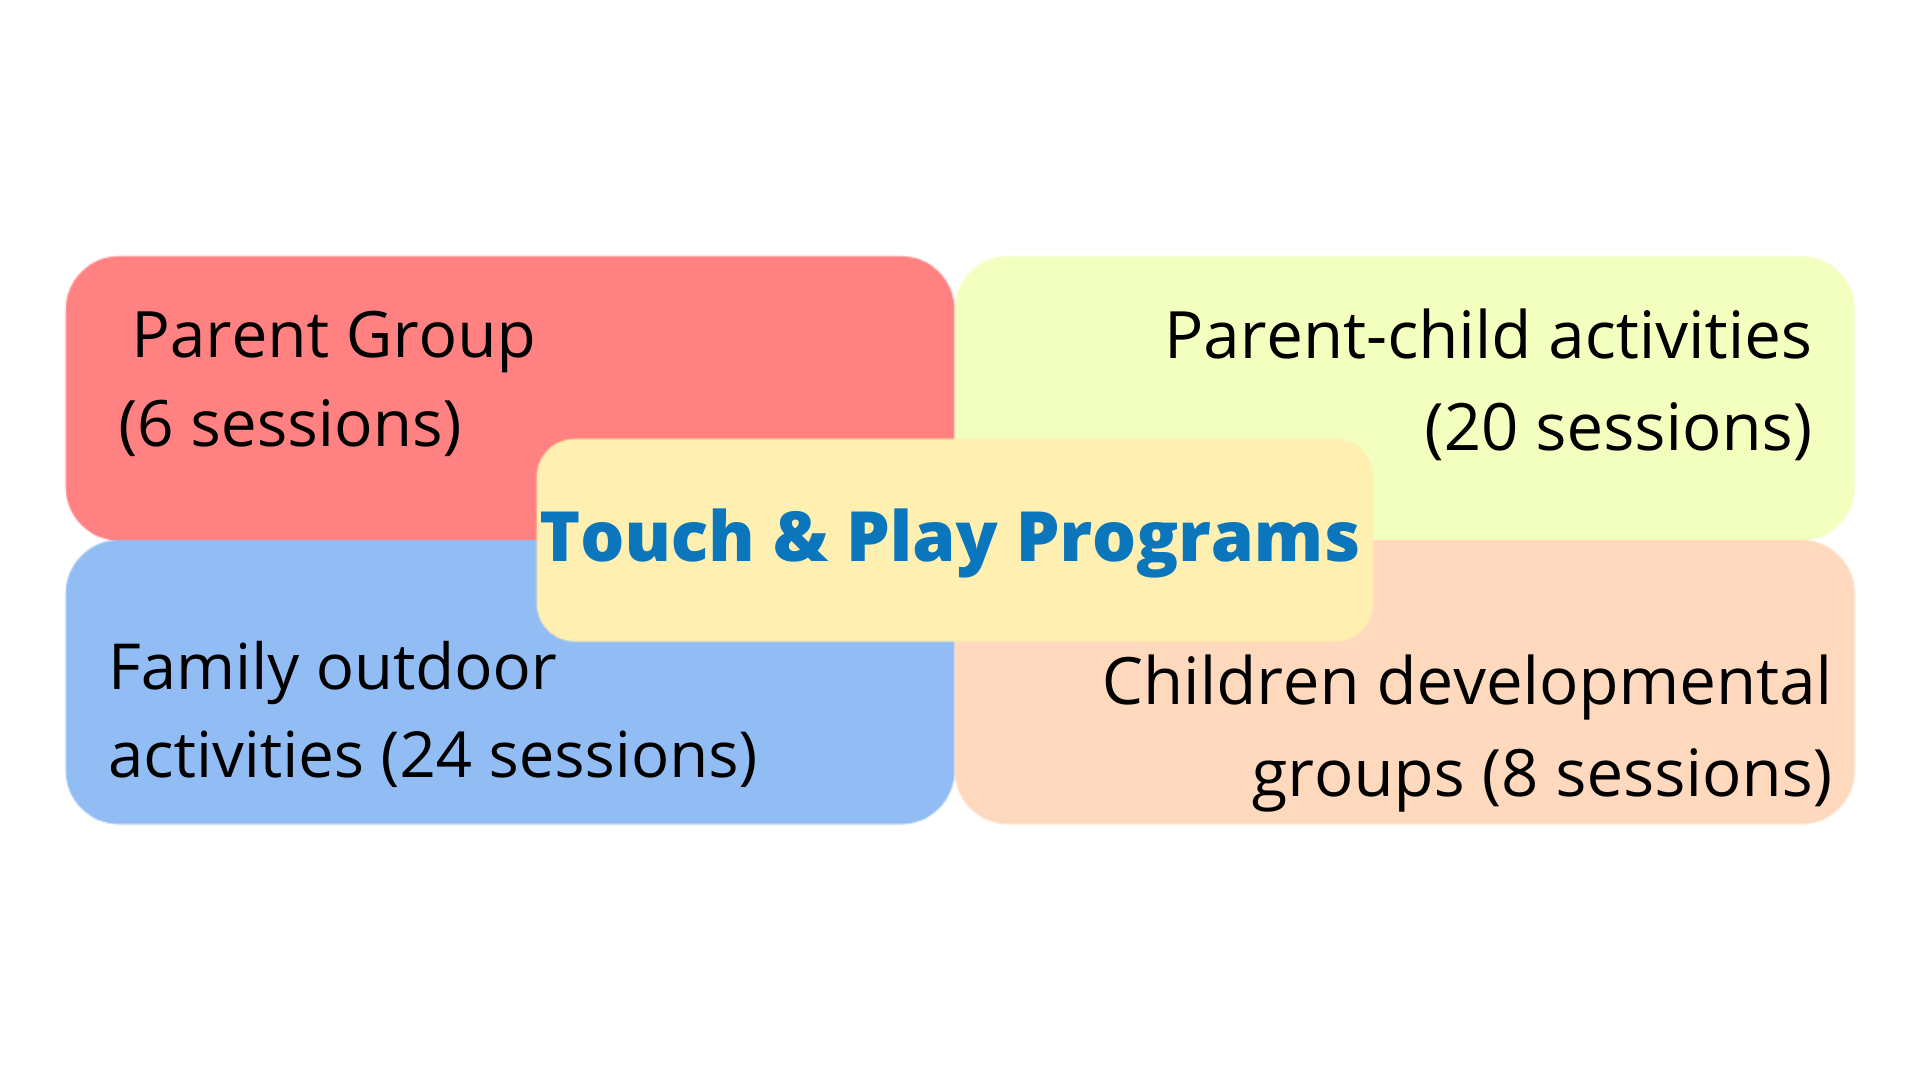 Touch & play programs: